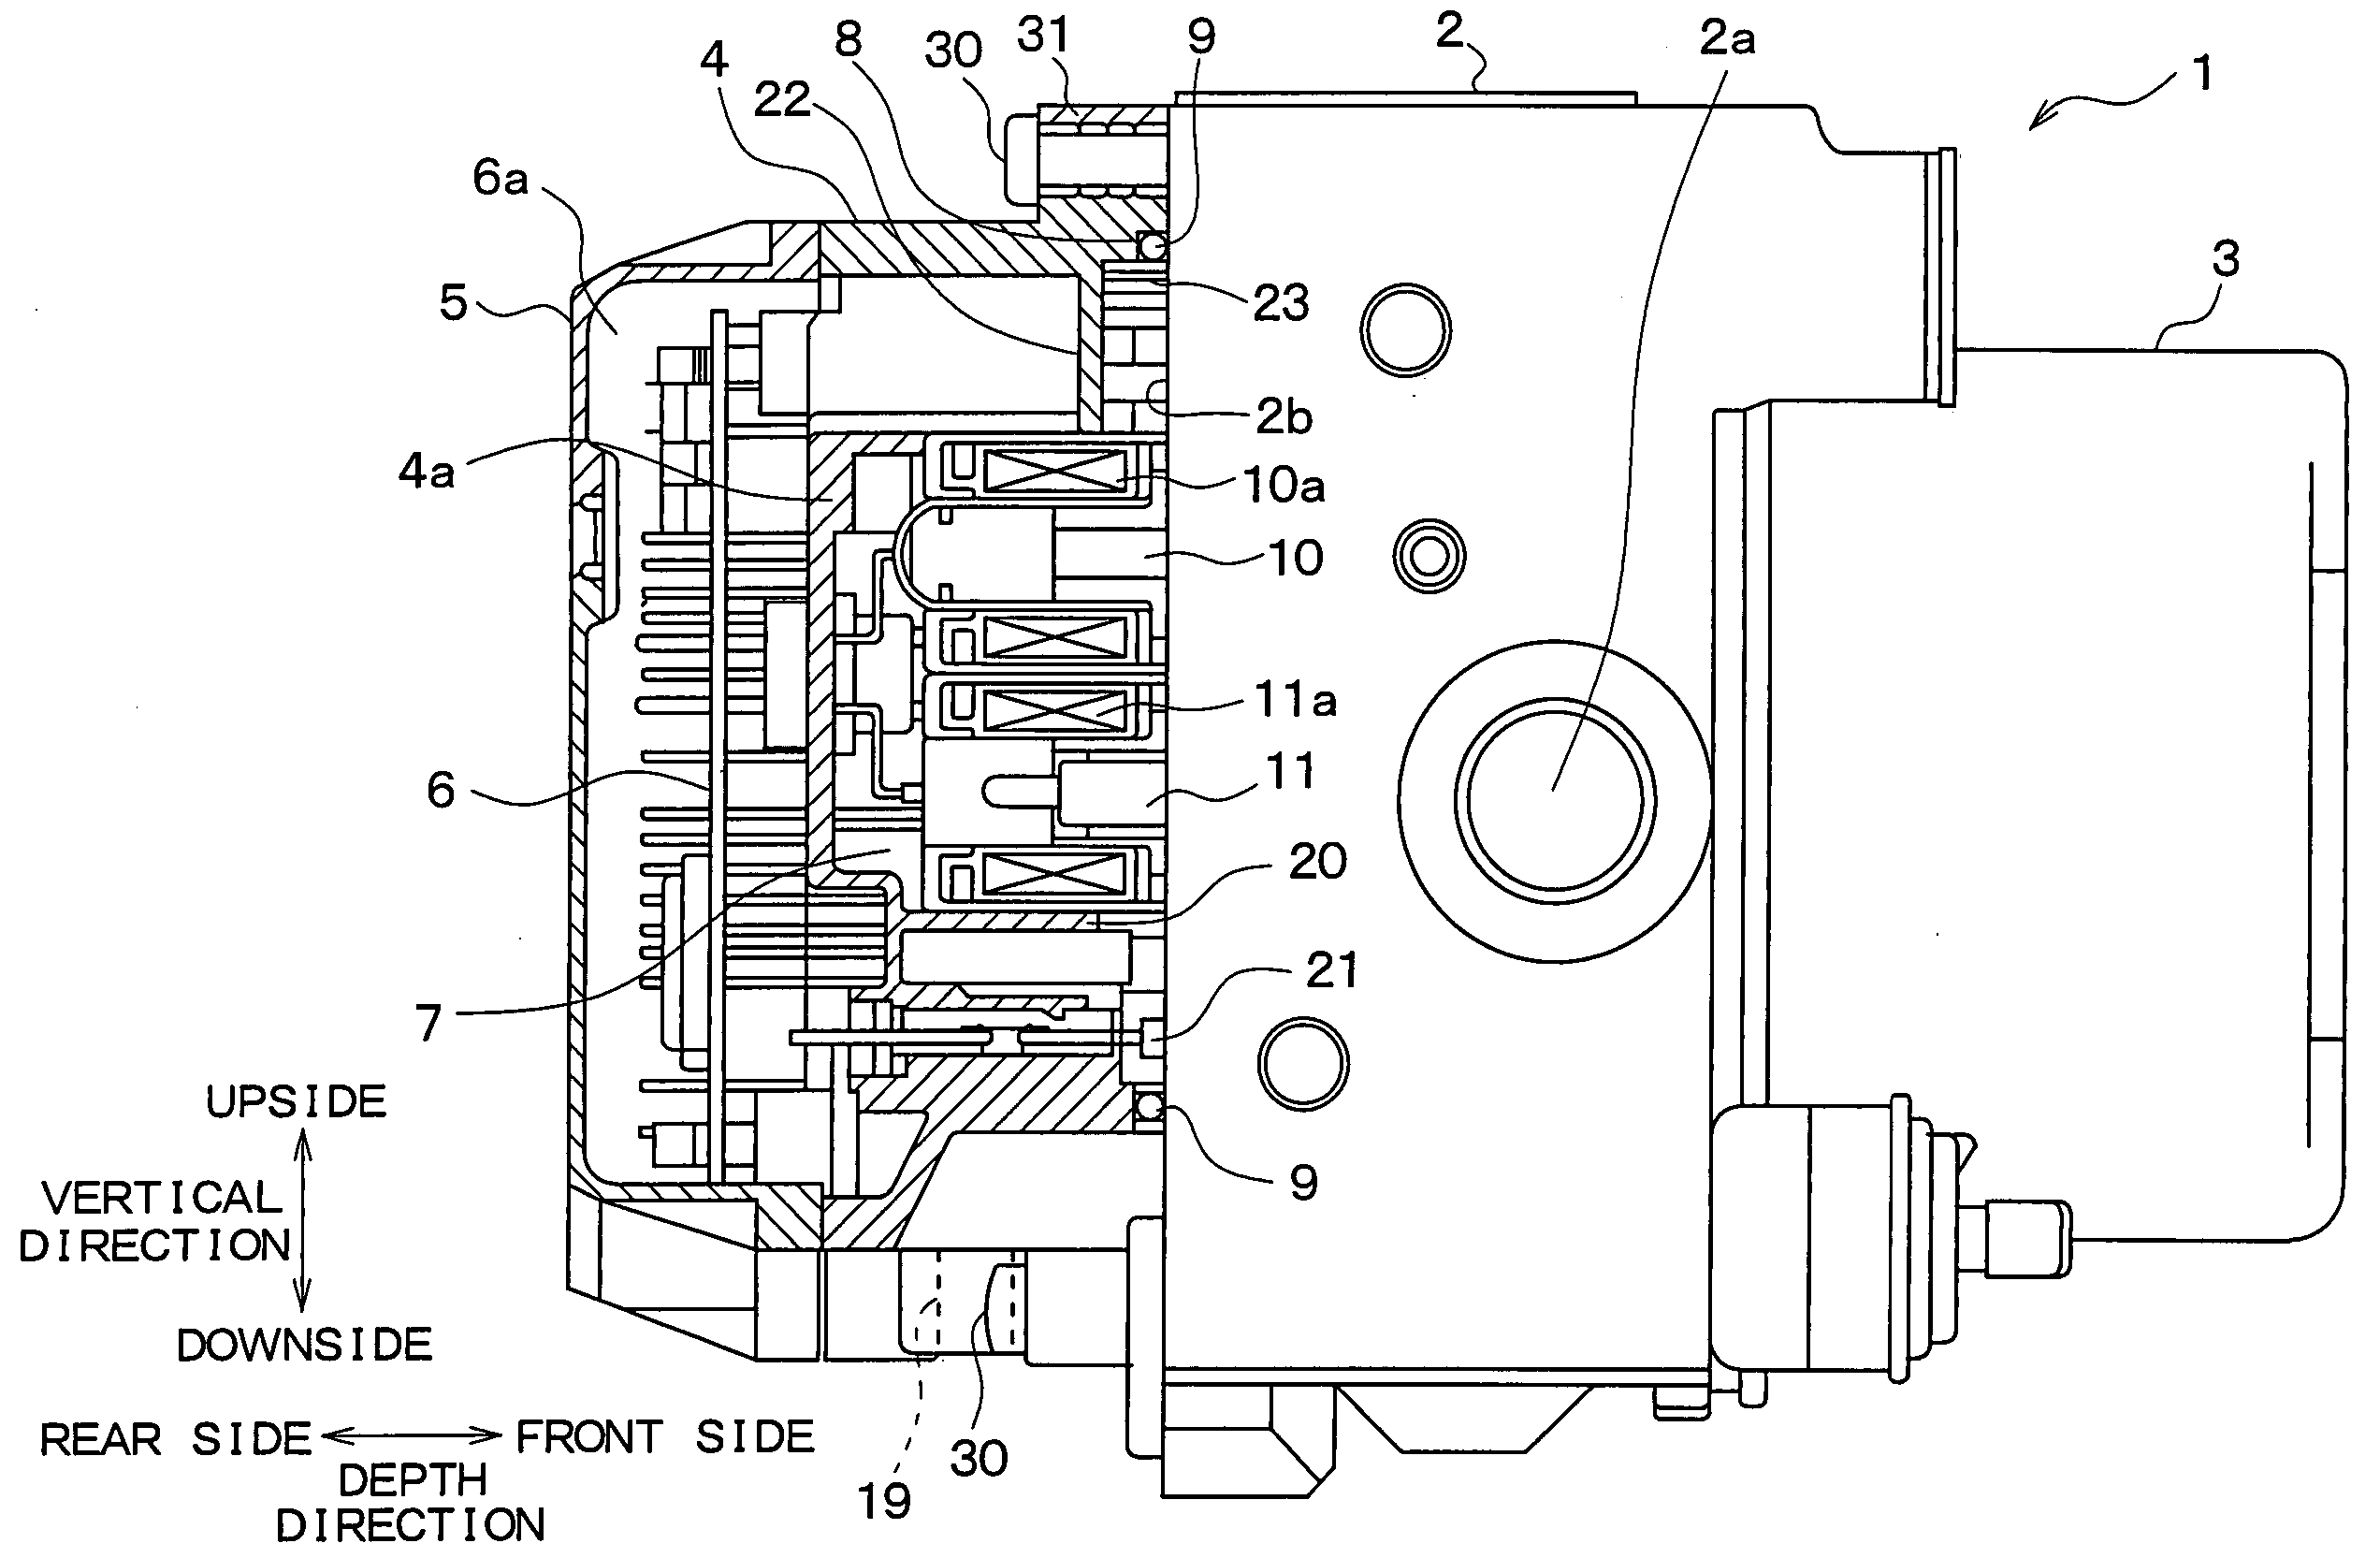 Hydraulic control system for vehicle